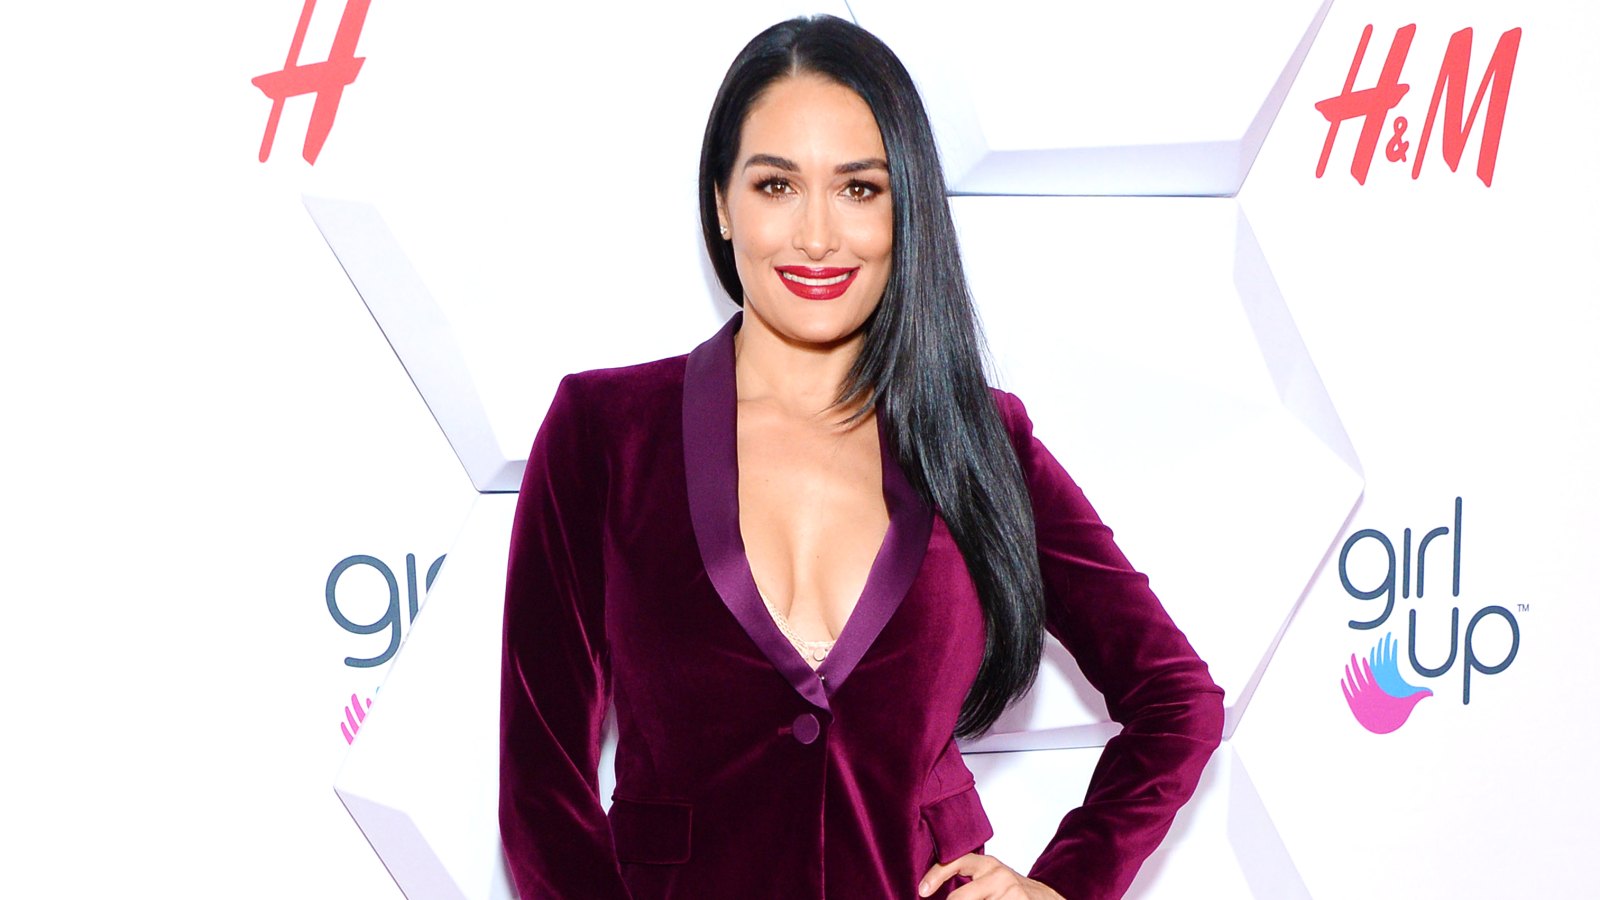 Nikki Bella Shows Off Bare Baby Bump While Dancing in WWE Costume